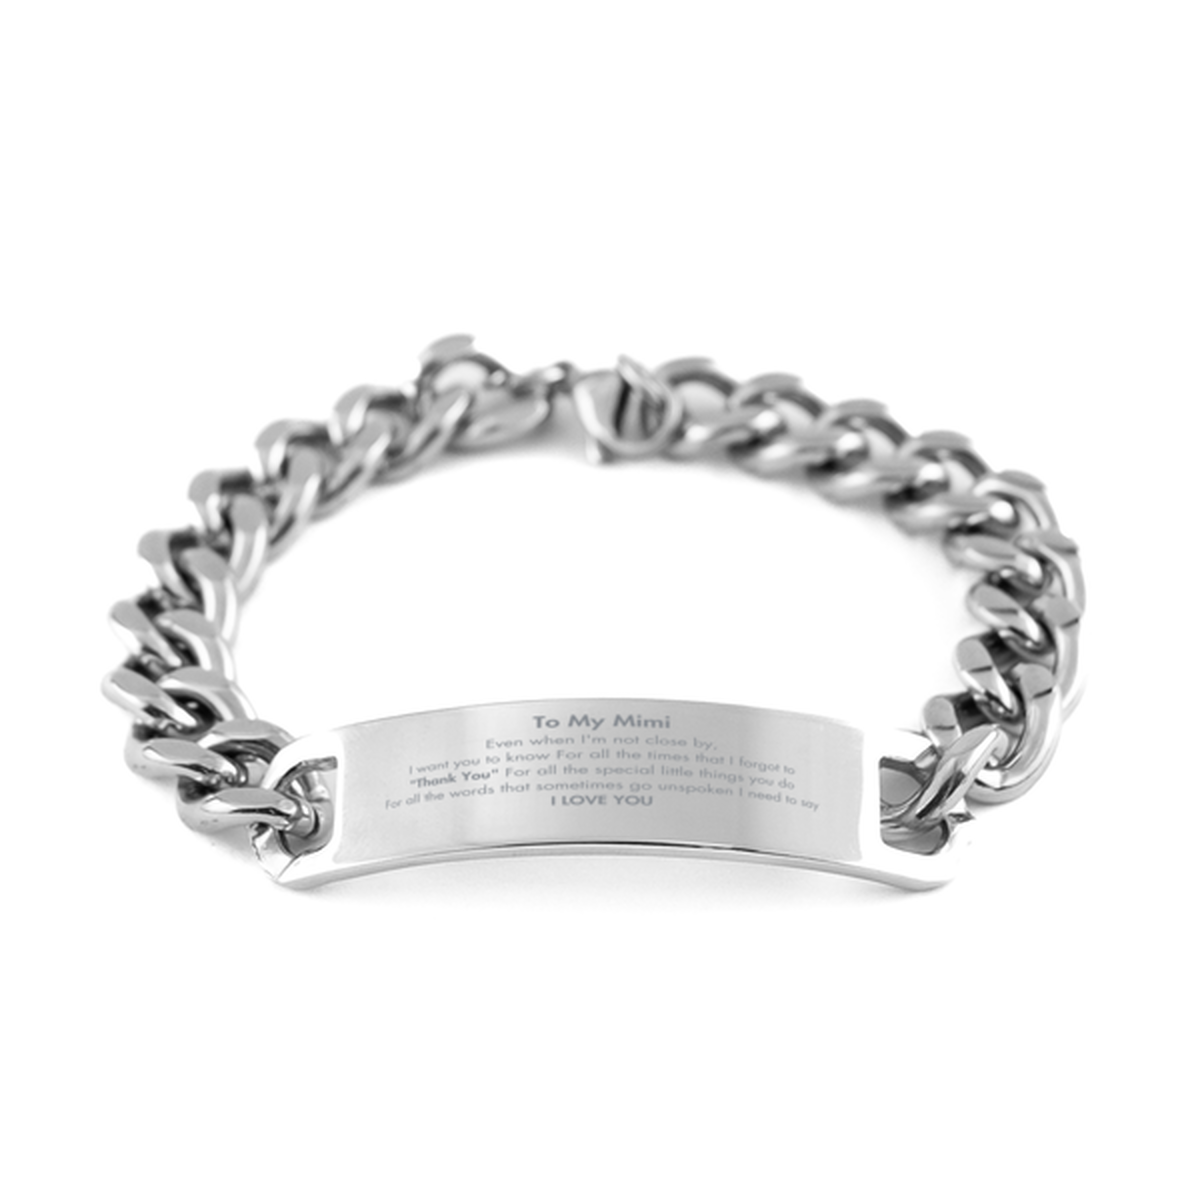 Thank You Gifts for Mimi, Keepsake Cuban Chain Stainless Steel Bracelet Gifts for Mimi Birthday Mother's day Father's Day Mimi For all the words That sometimes go unspoken I need to say I LOVE YOU